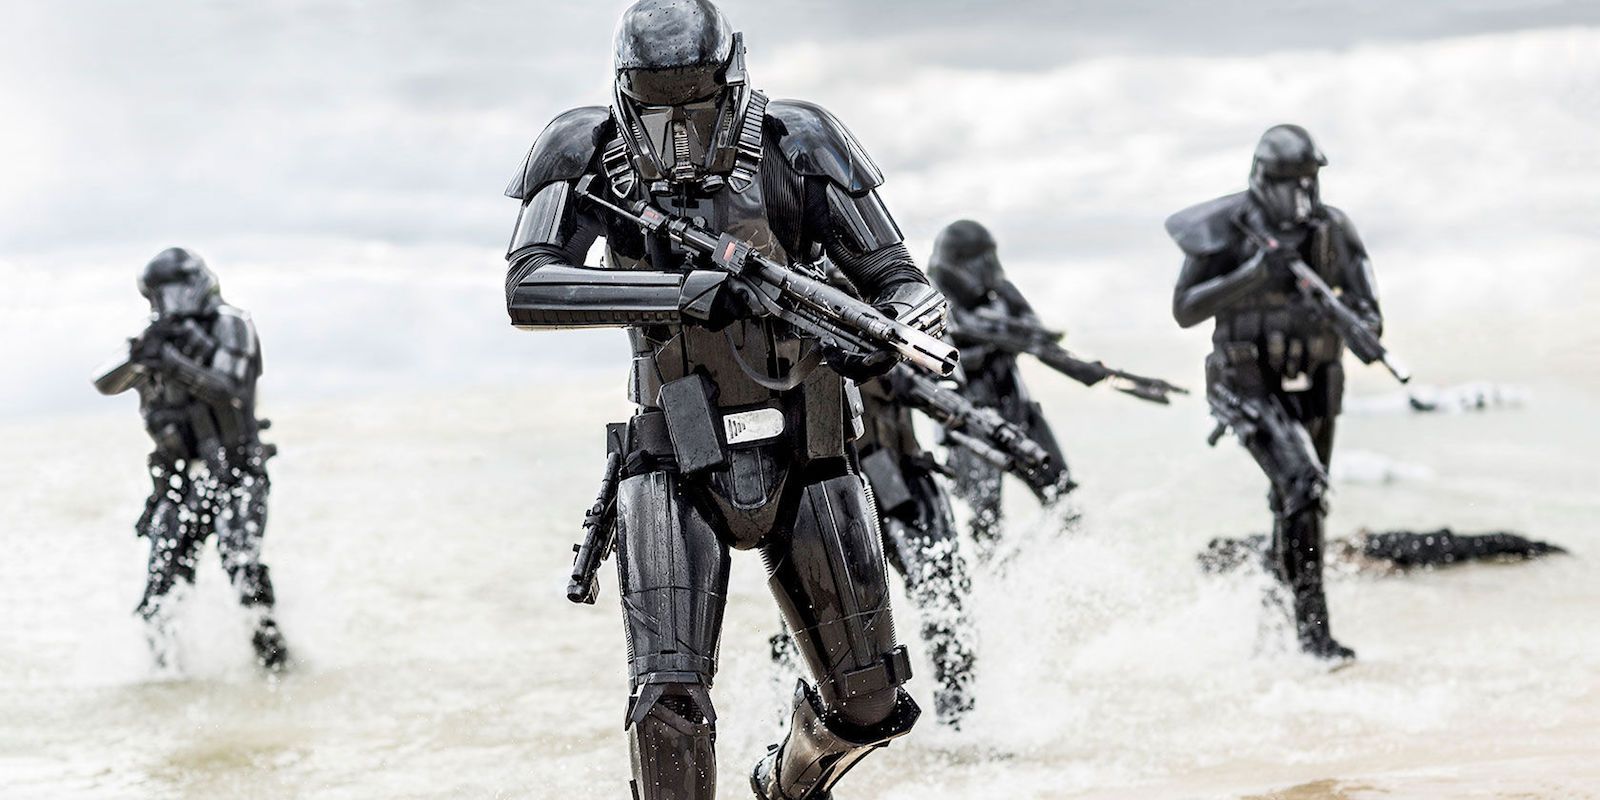 Deathtroopers storming the beach in Star Wars Rogue One.